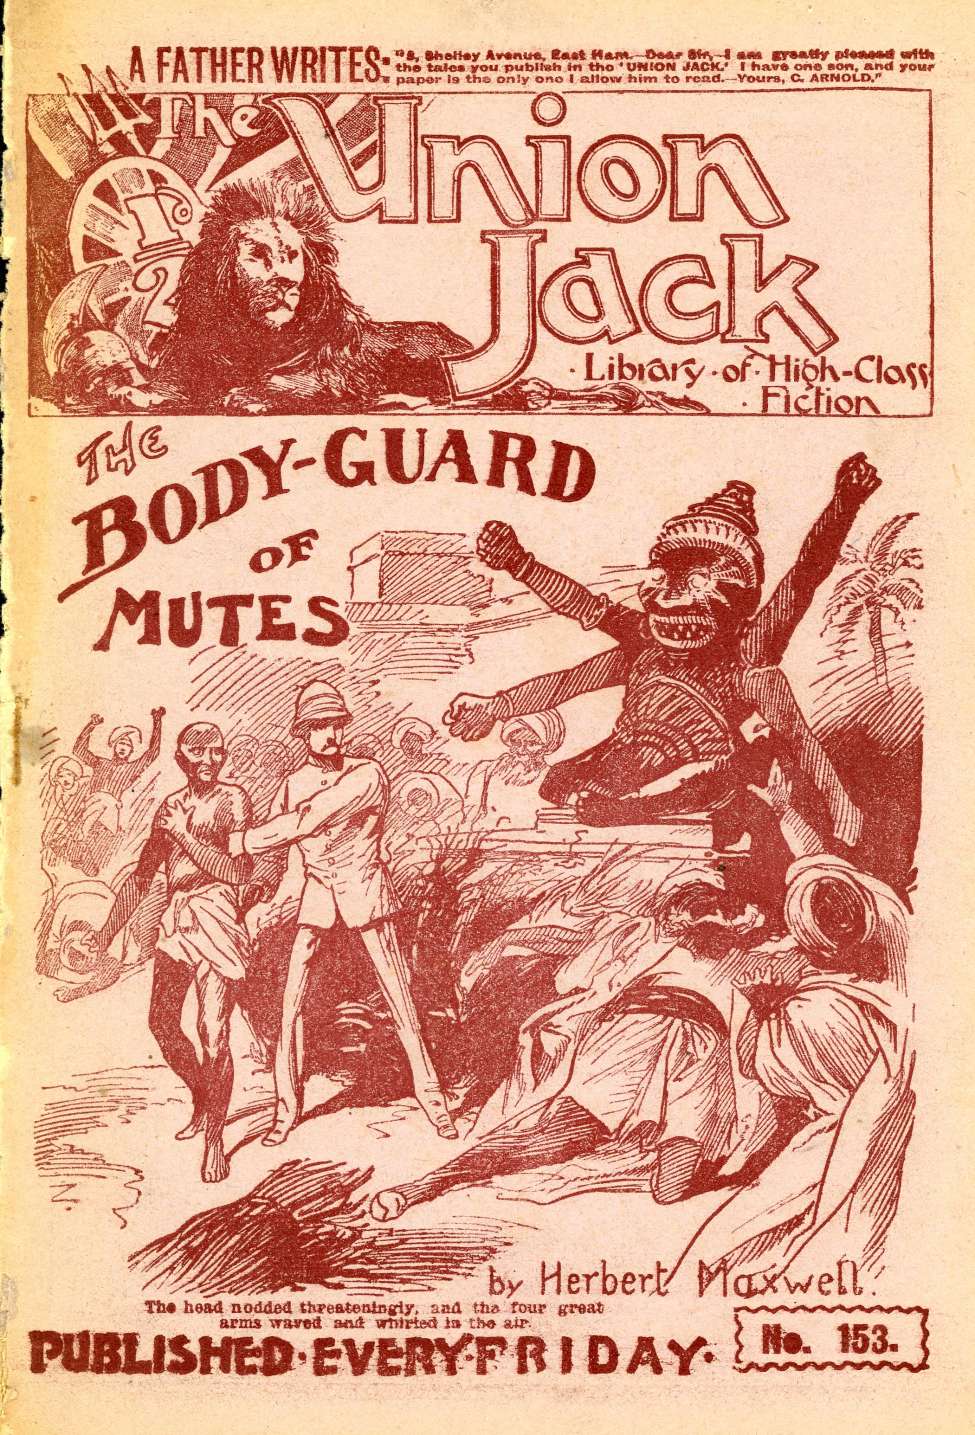 Comic Book Cover For The Union Jack 153 - The Body-Guard of Mutes